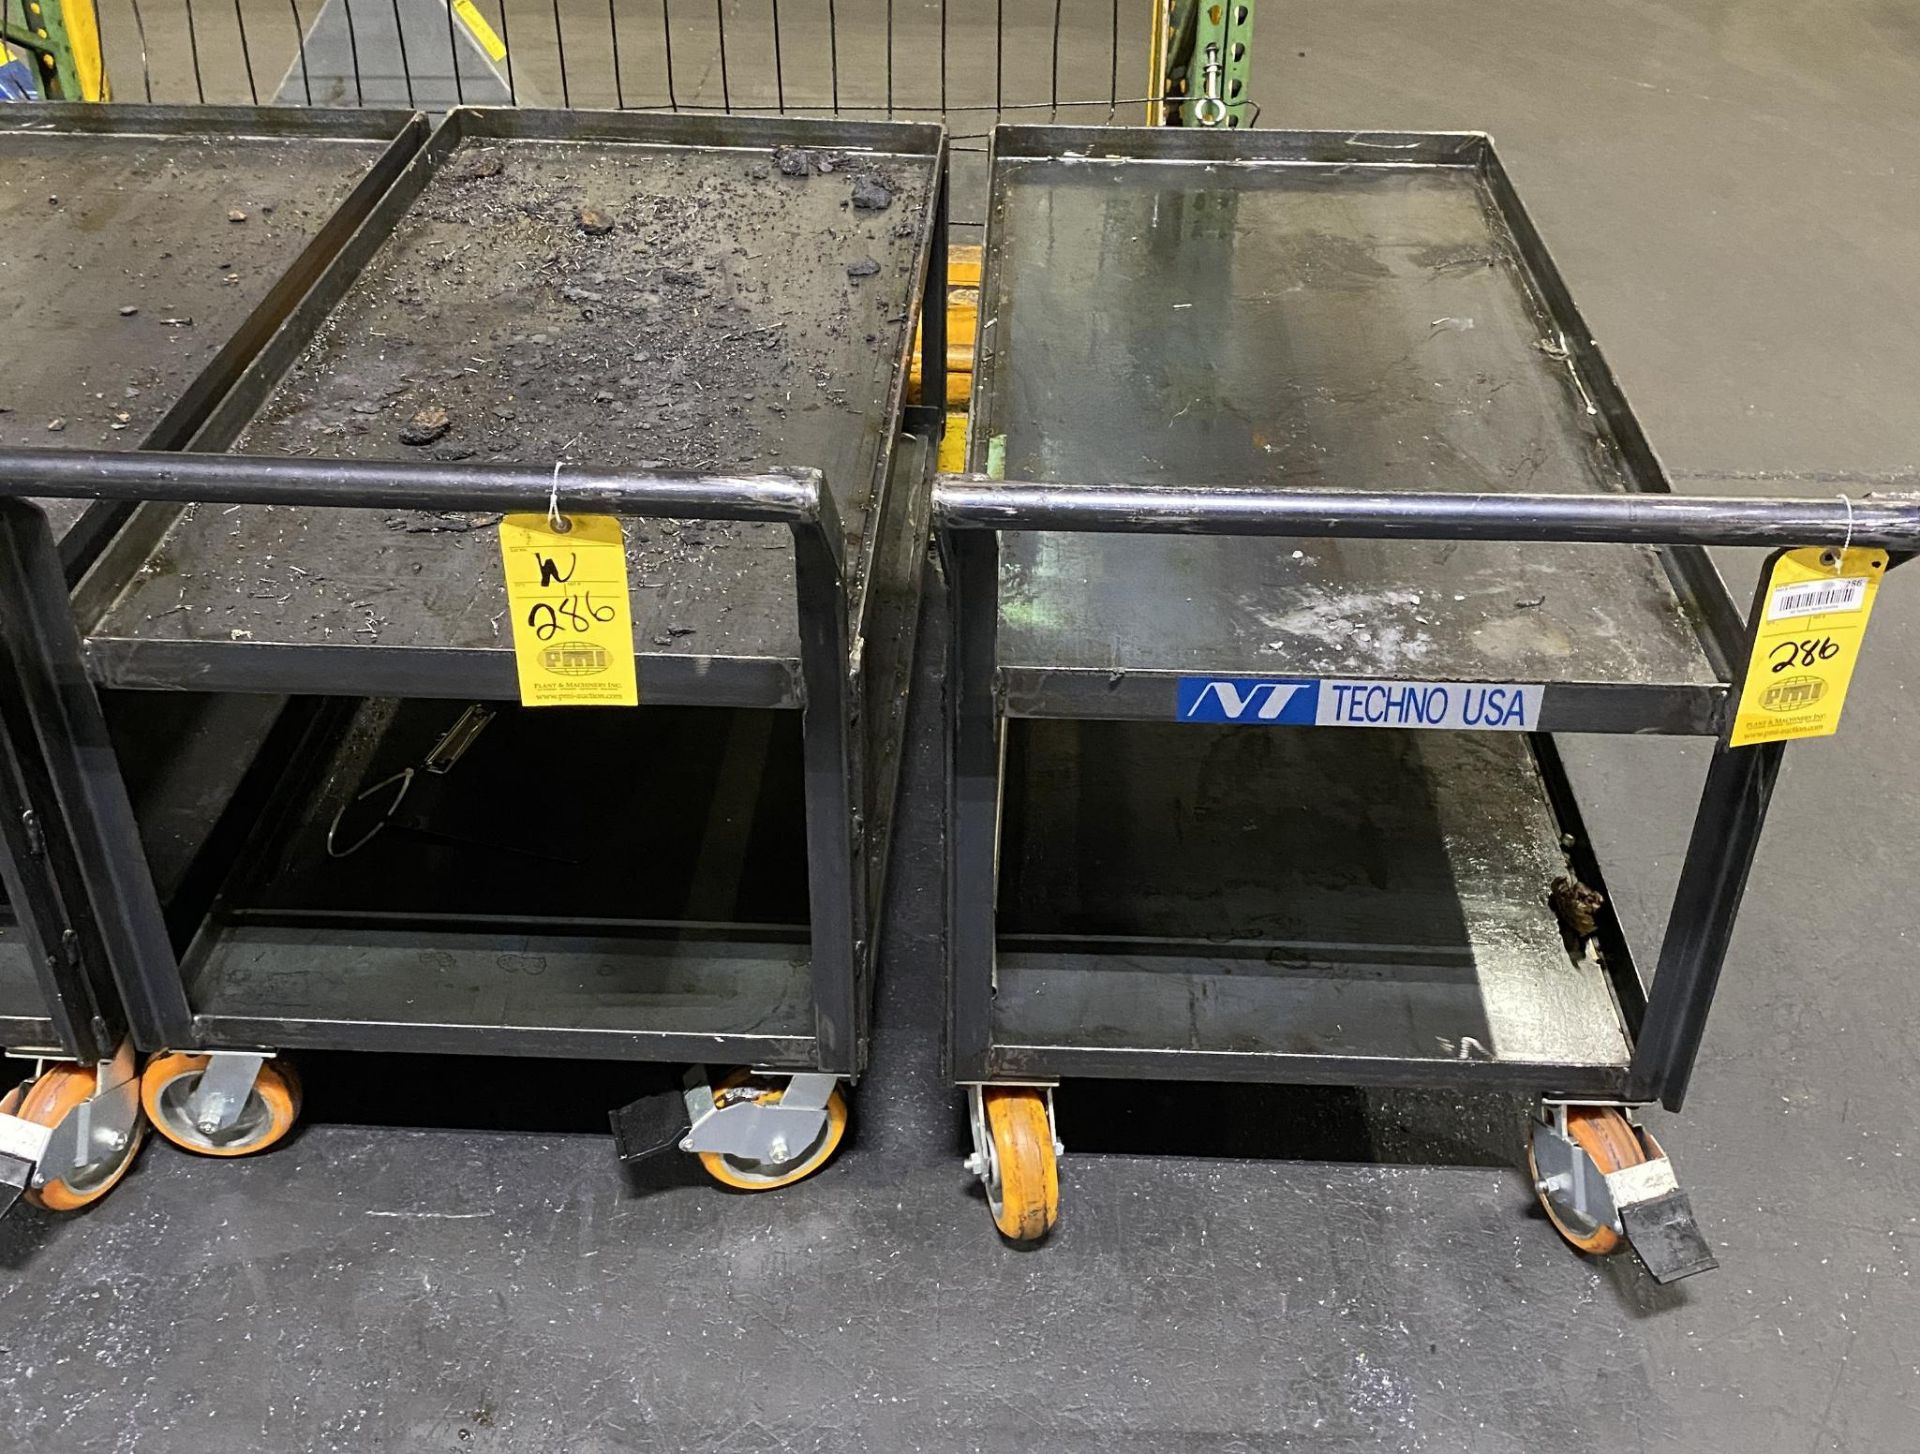 LOT OF HEAVY GAUGE ROLLING MATERIAL TRANSPORT CARTS (2), double shelf, 26"W. x 49"L. x 26" tall